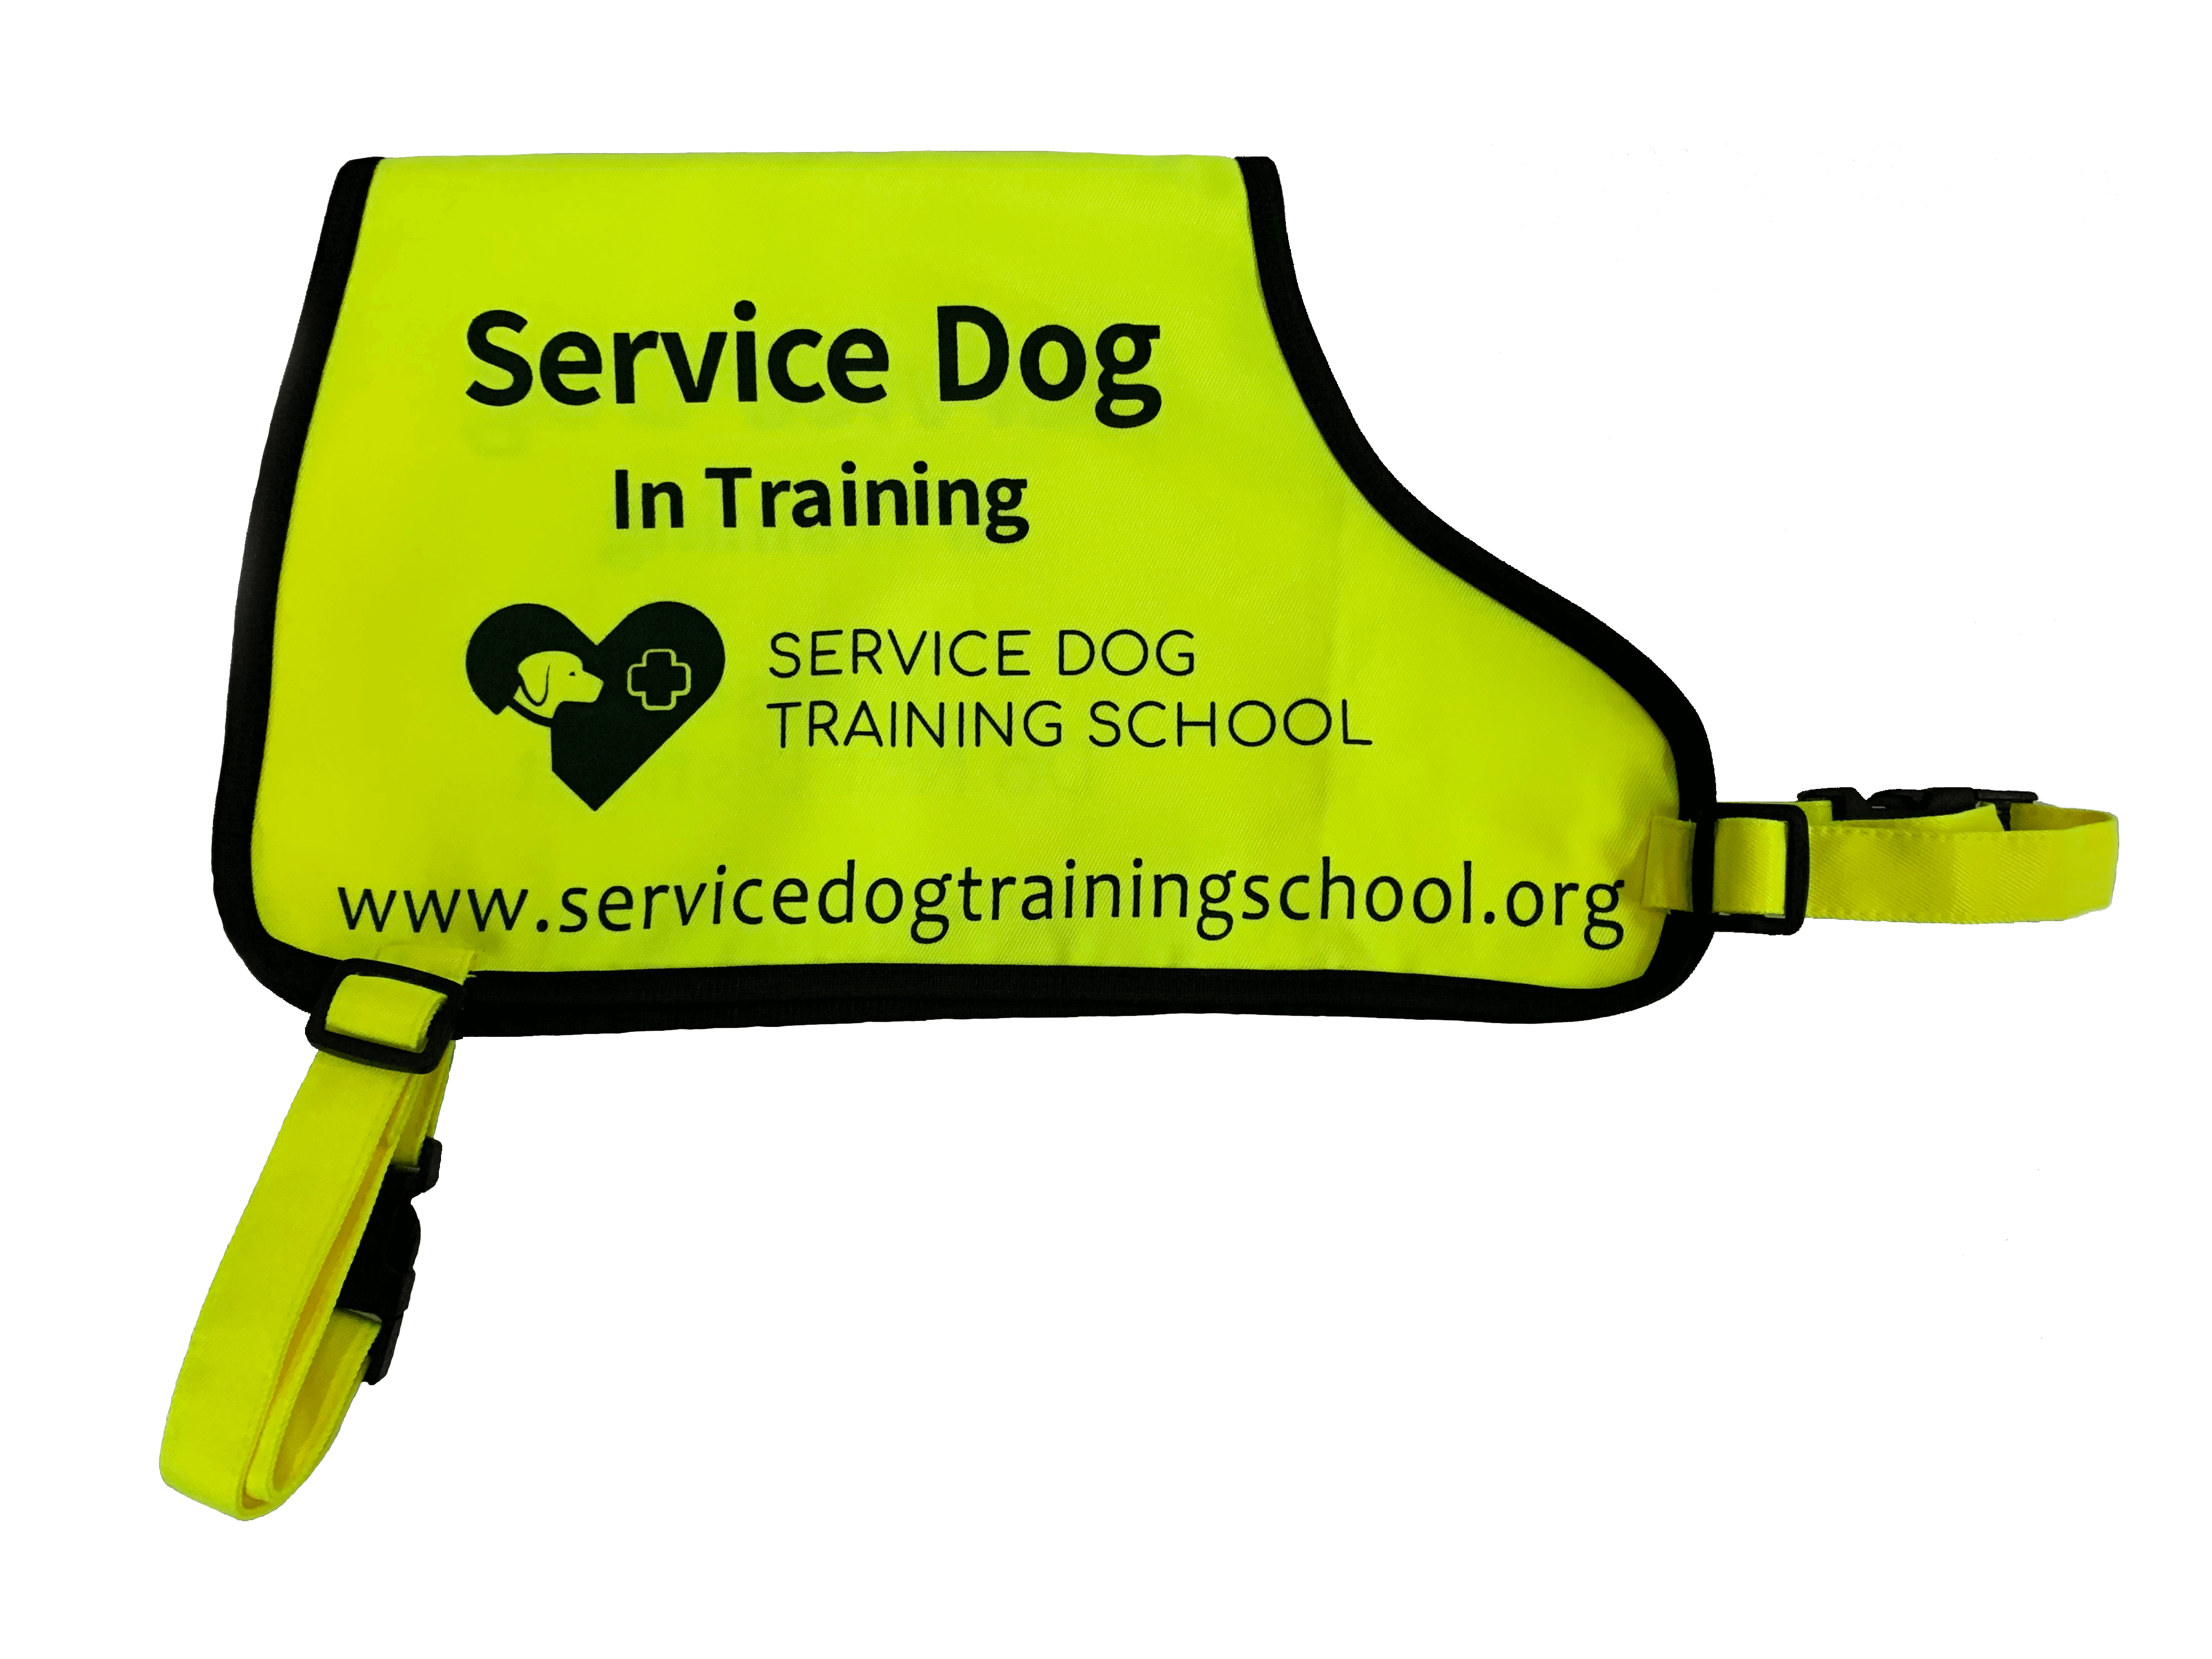 therapy-dog-certificate-id-card-registration-service-dog-certificates